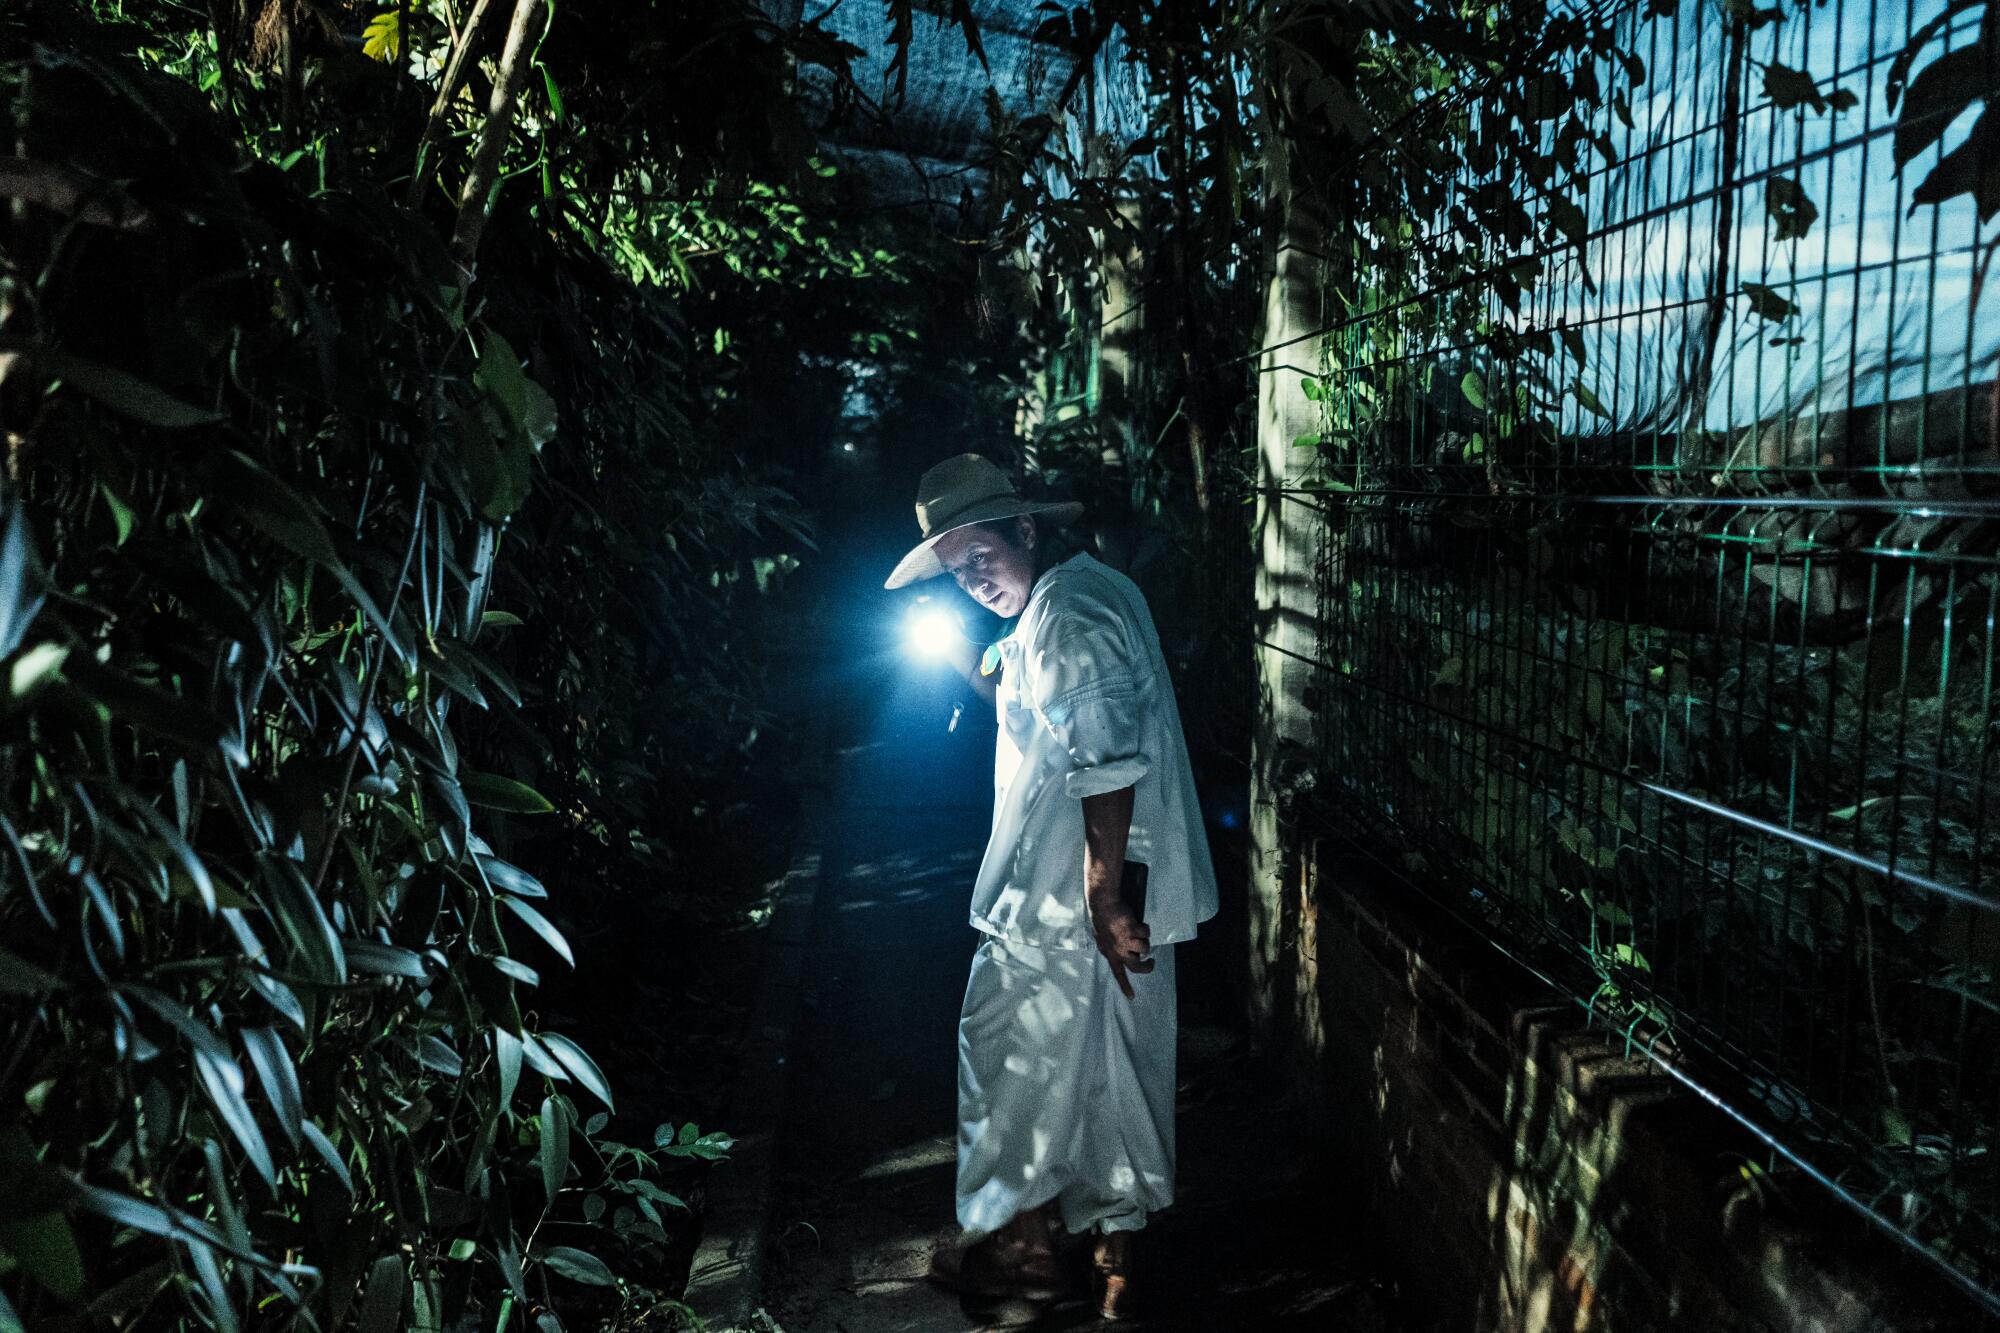 A man in a straw hat and loose white clothes walks among plants at night with a flashlight.